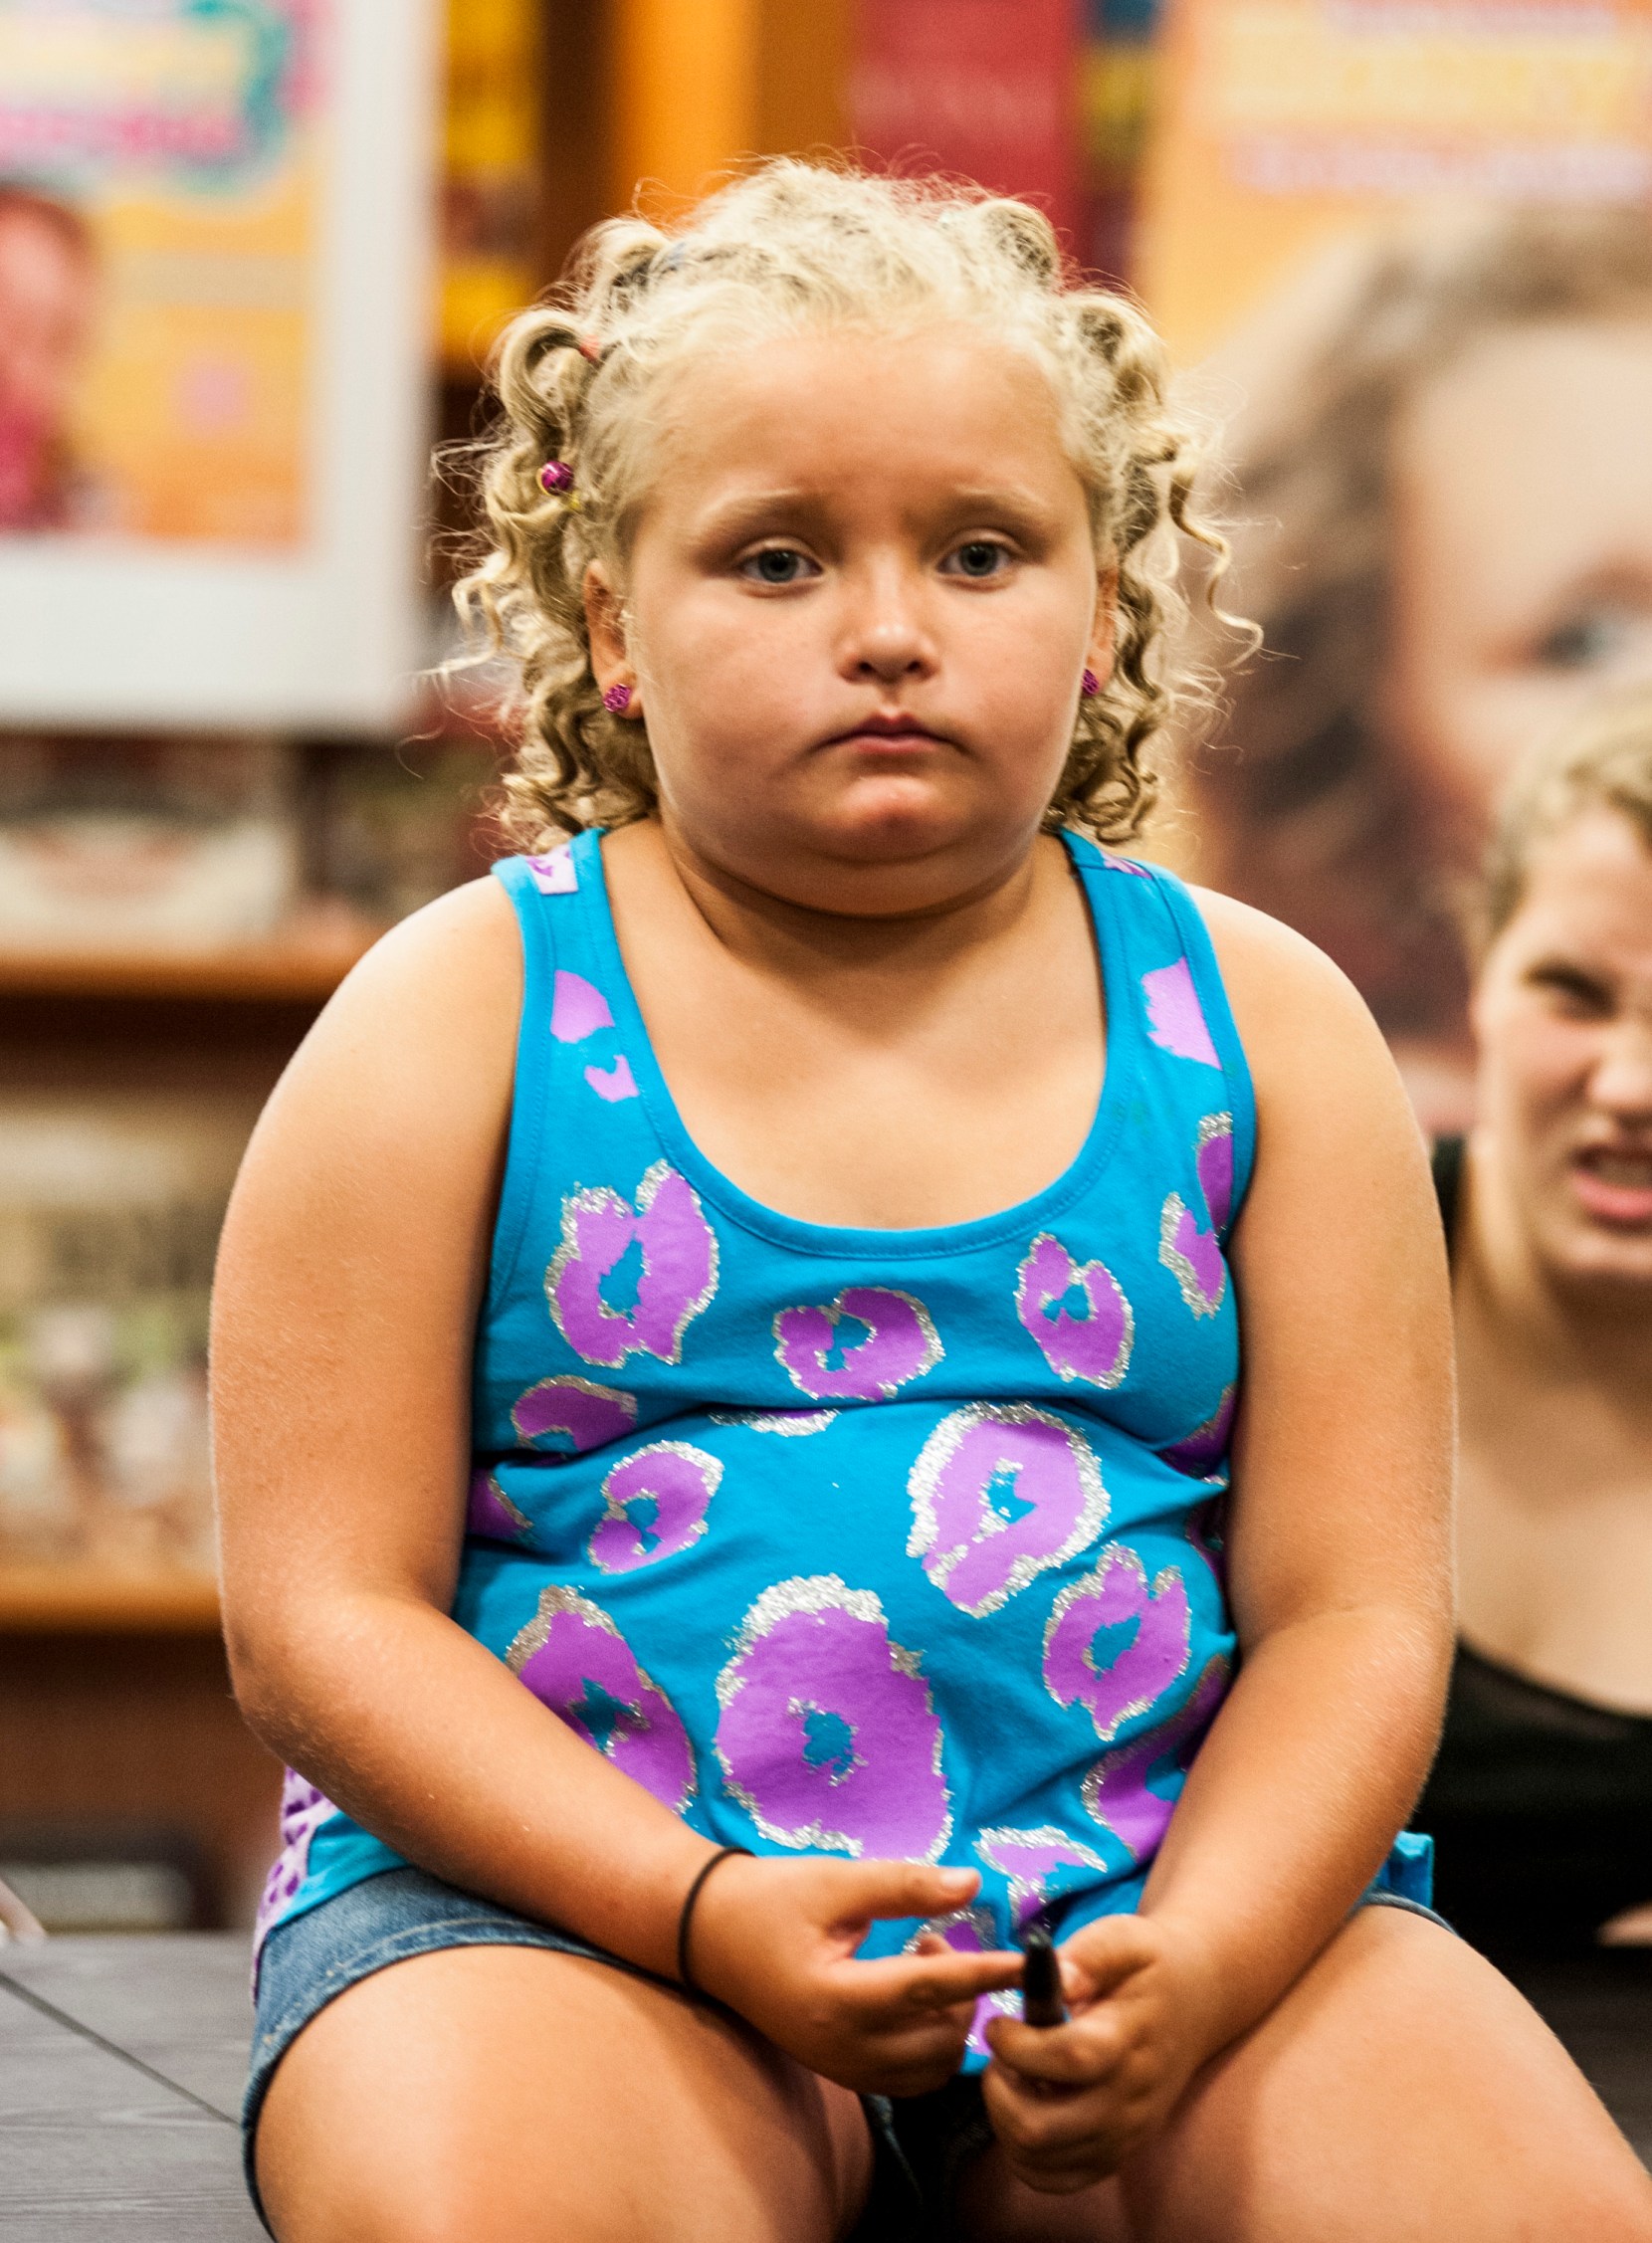 Honey Boo Boo Doctors Are In A Fight To Save Her Life Because She Is Too Fat Report In